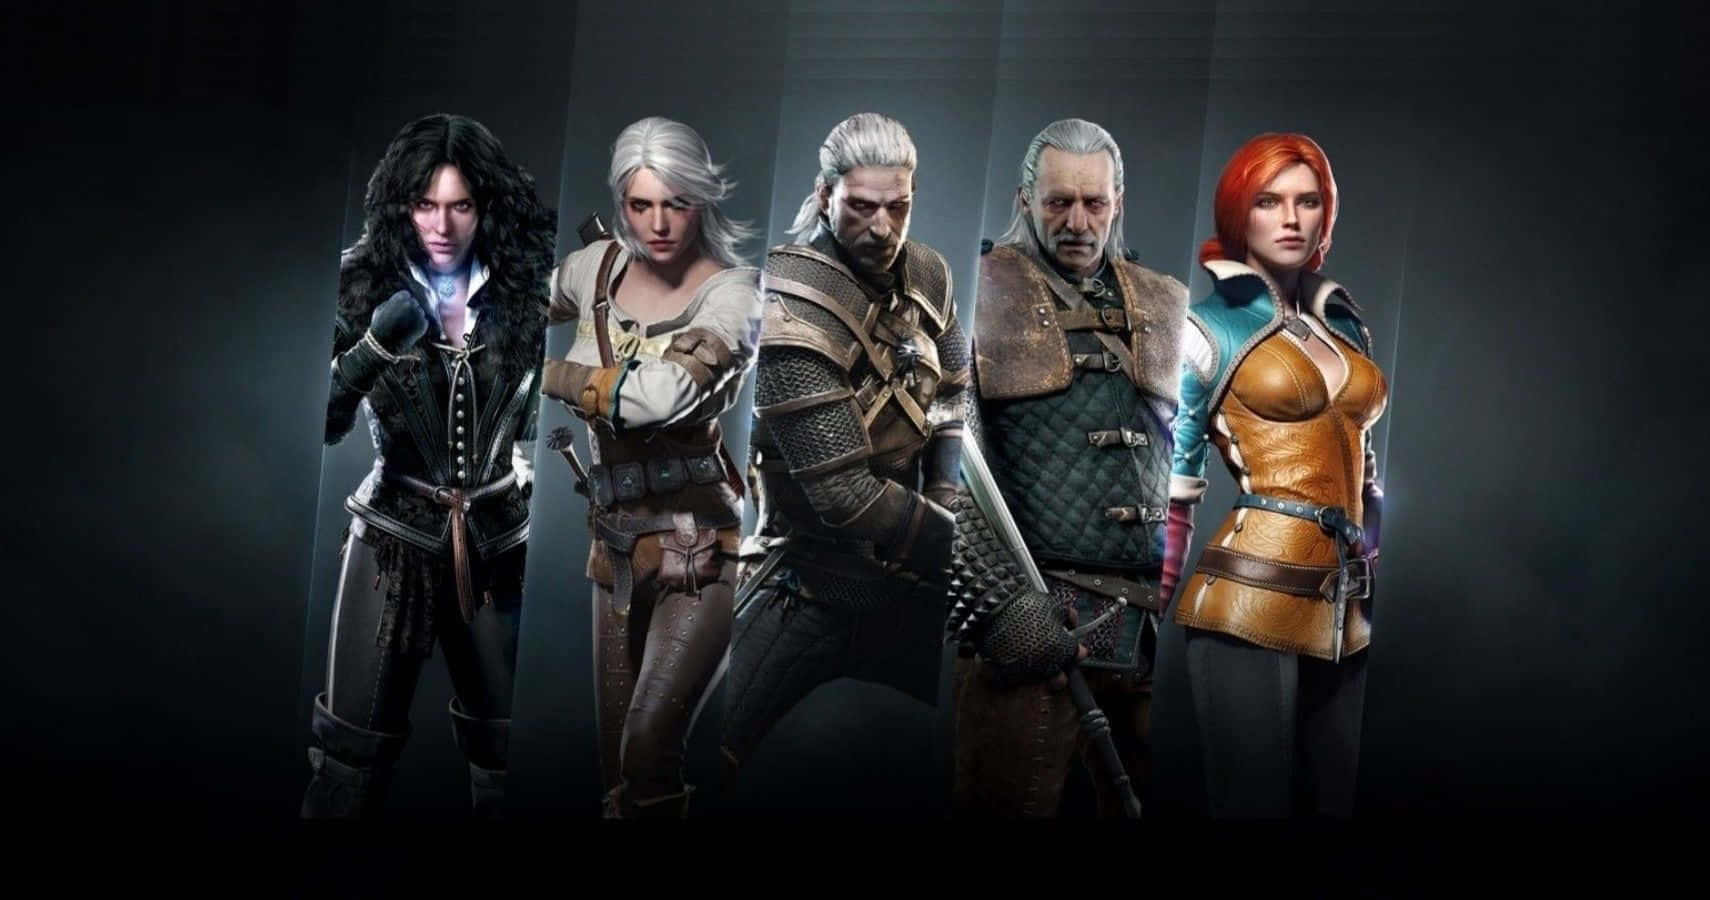 The Witcher Characters Gathered Together Wallpaper